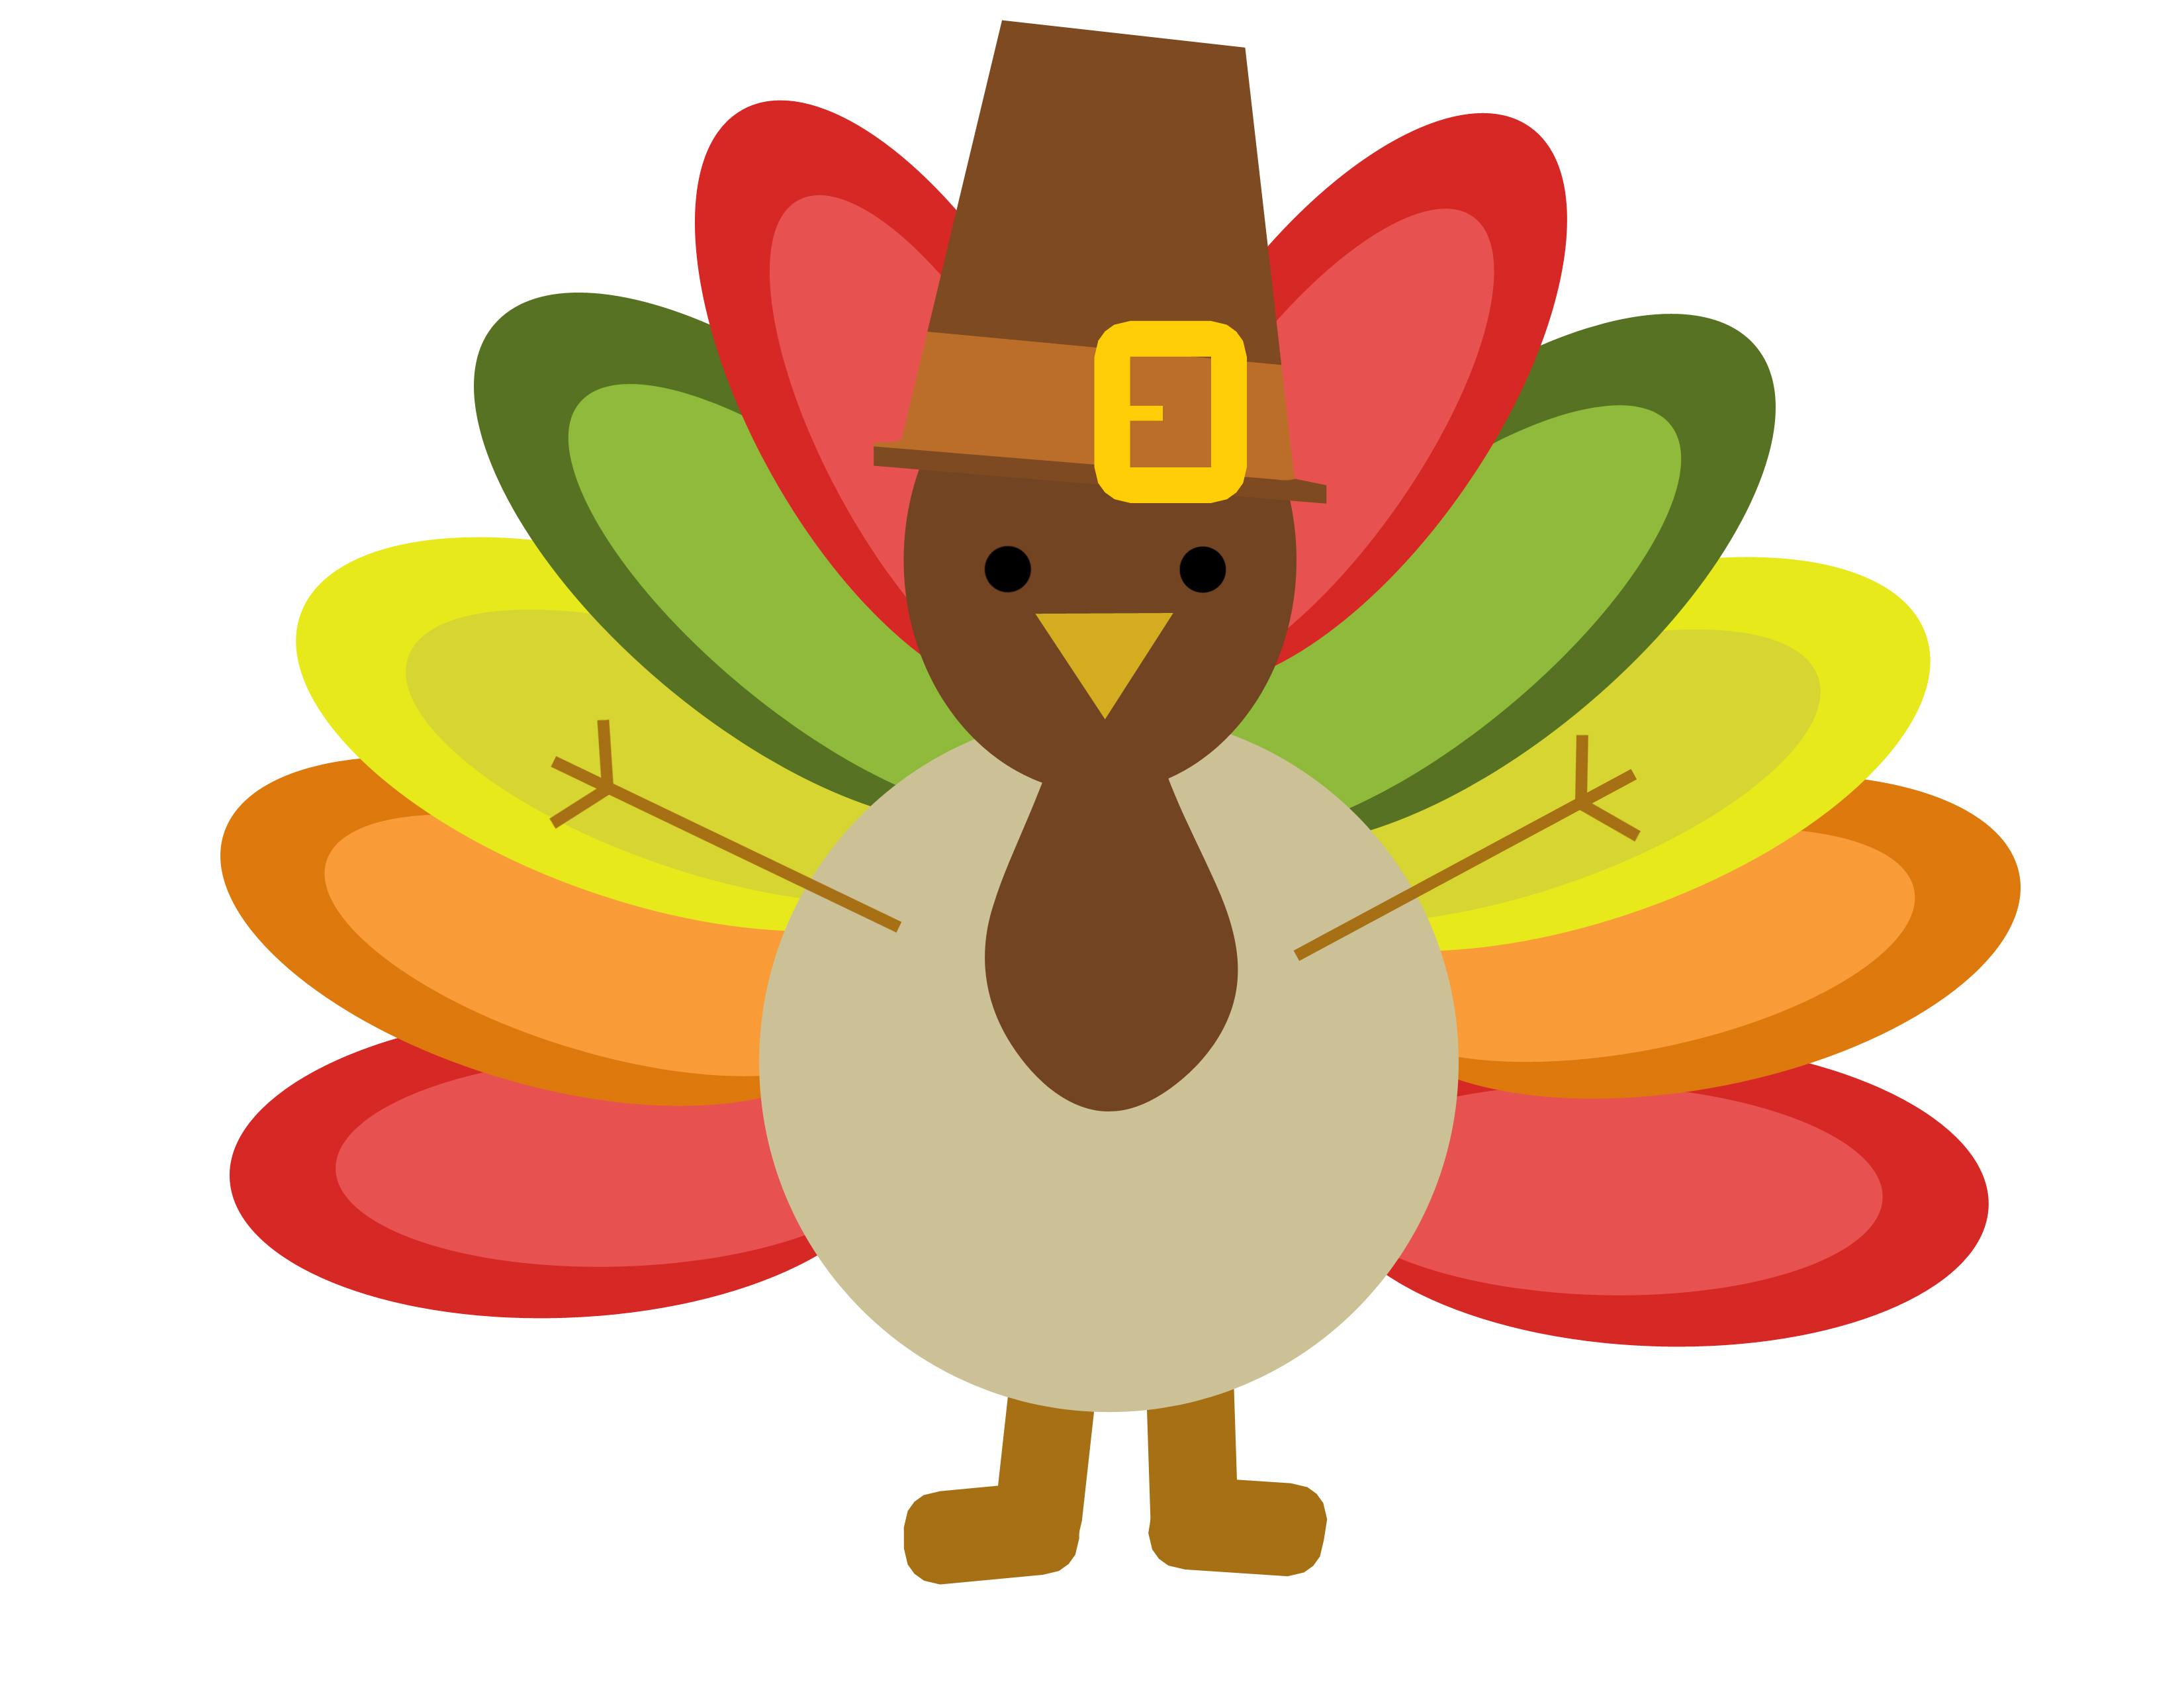 Feathers clipart thanksgiving. Turkey cartoon color hat